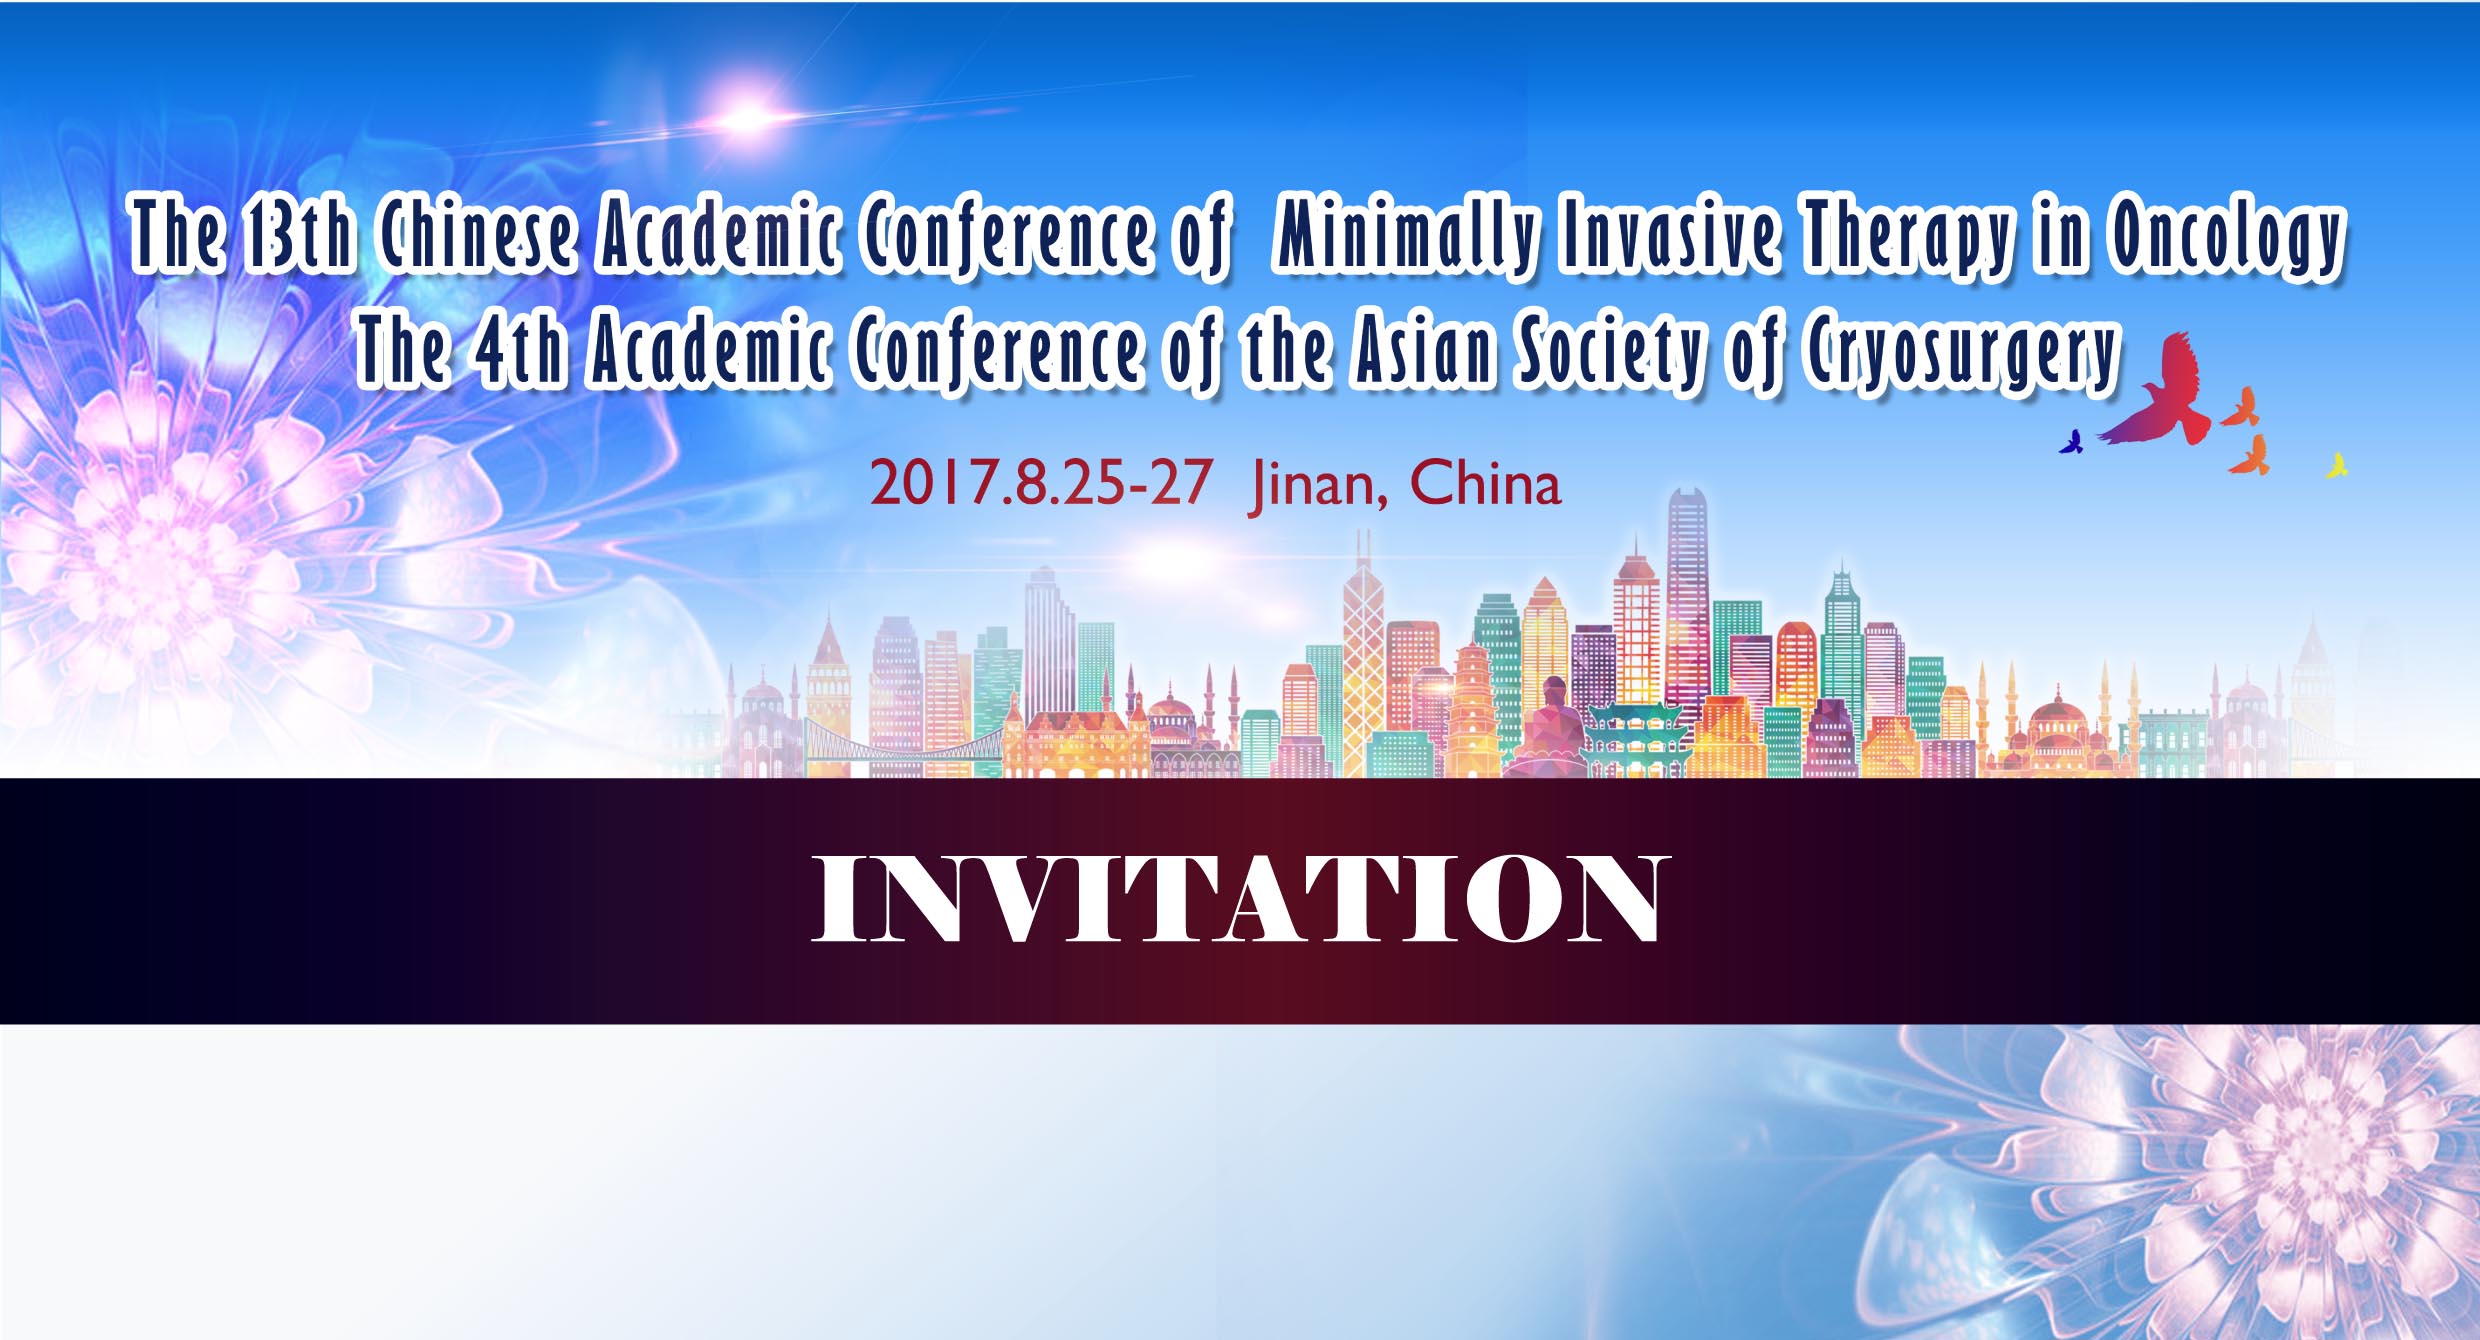 The 13th Chinese Academic Conference of Minimally Invasive Therapy in Oncology  The 4th Academic Conference of the Asian Society of cryosurgery  INVITATION